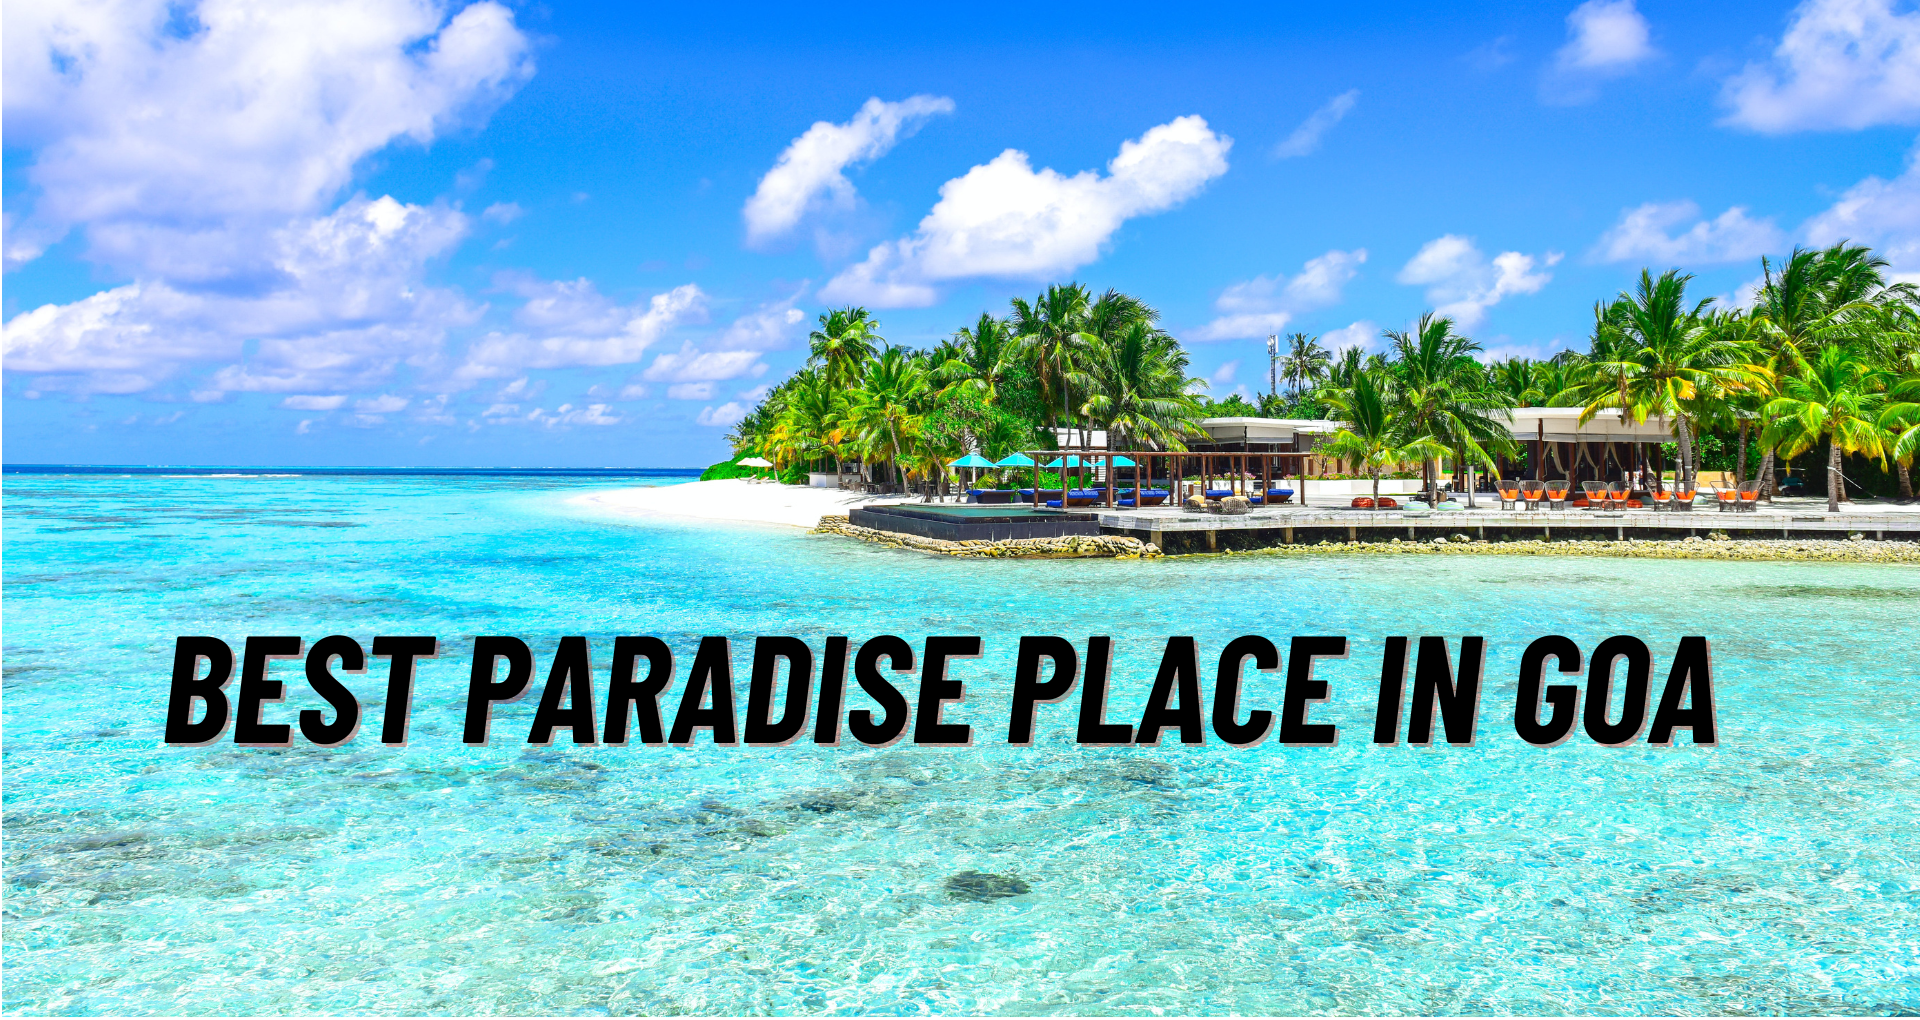 Finding The Best Paradise Place in Goa